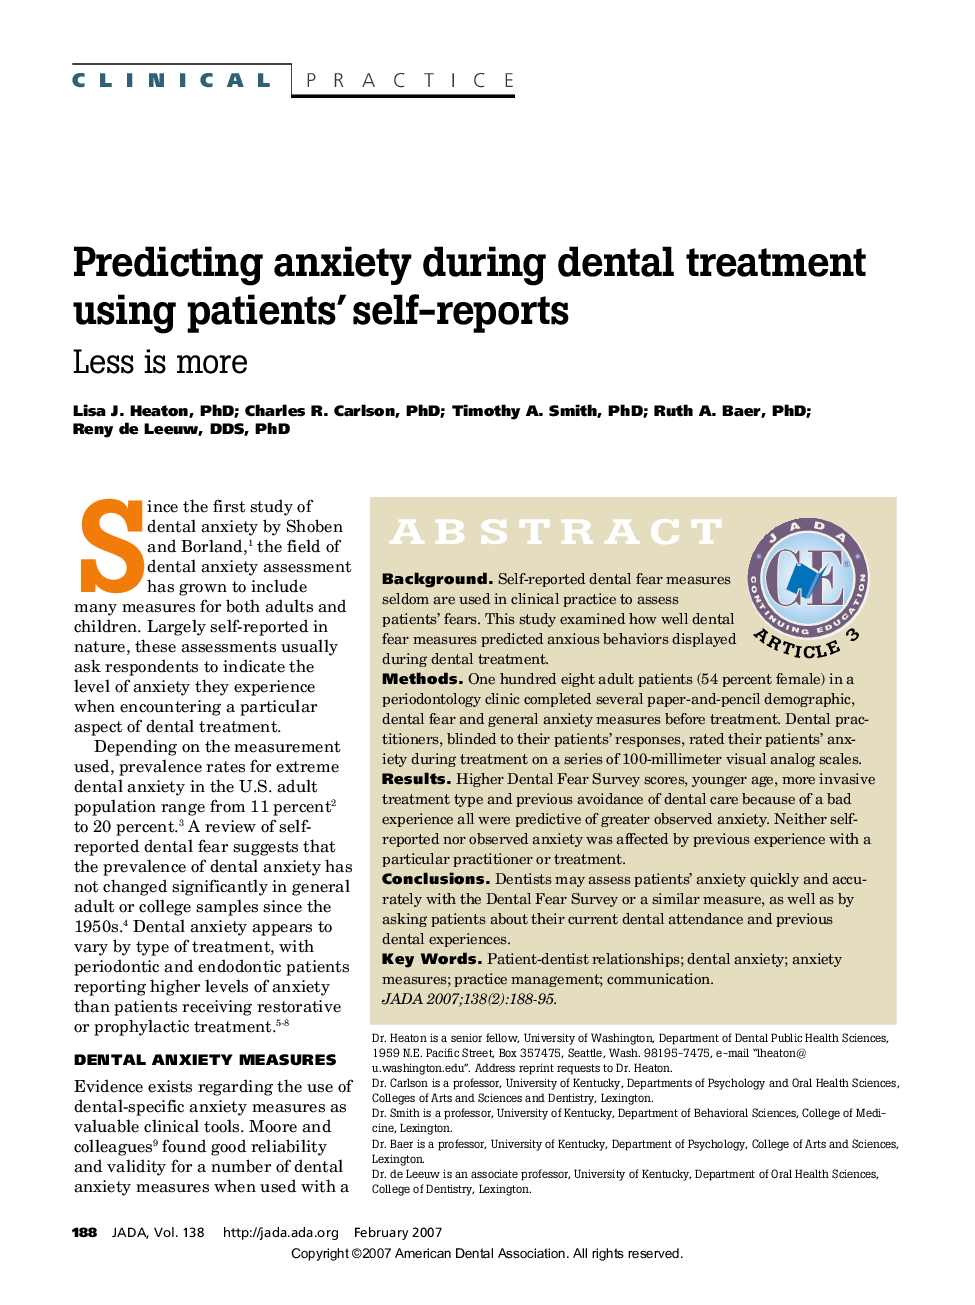 Predicting anxiety during dental treatment using patients'self-reports : Less is more